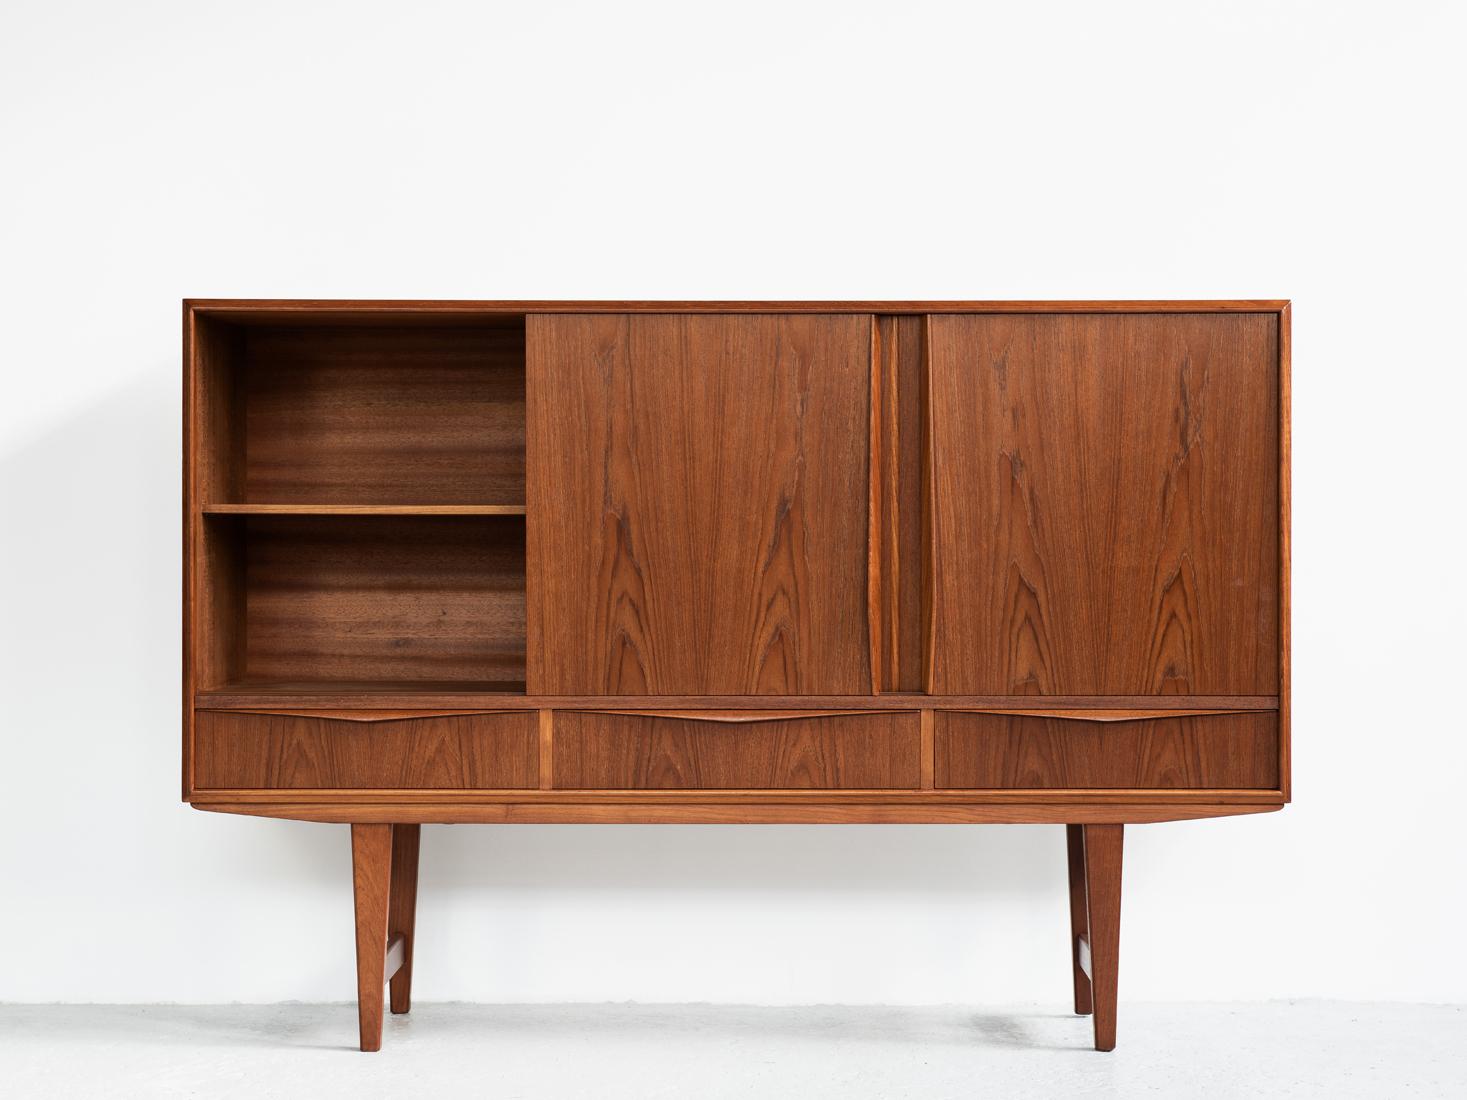 Midcentury highboard designed by EW Bach for Sejling Skabe in Denmark in the 1960s. This well designed high sideboard has 3 sliding doors and 3 drawers. Inside there is a practical bar compartment with 2 drawers on the right side. This highboard is